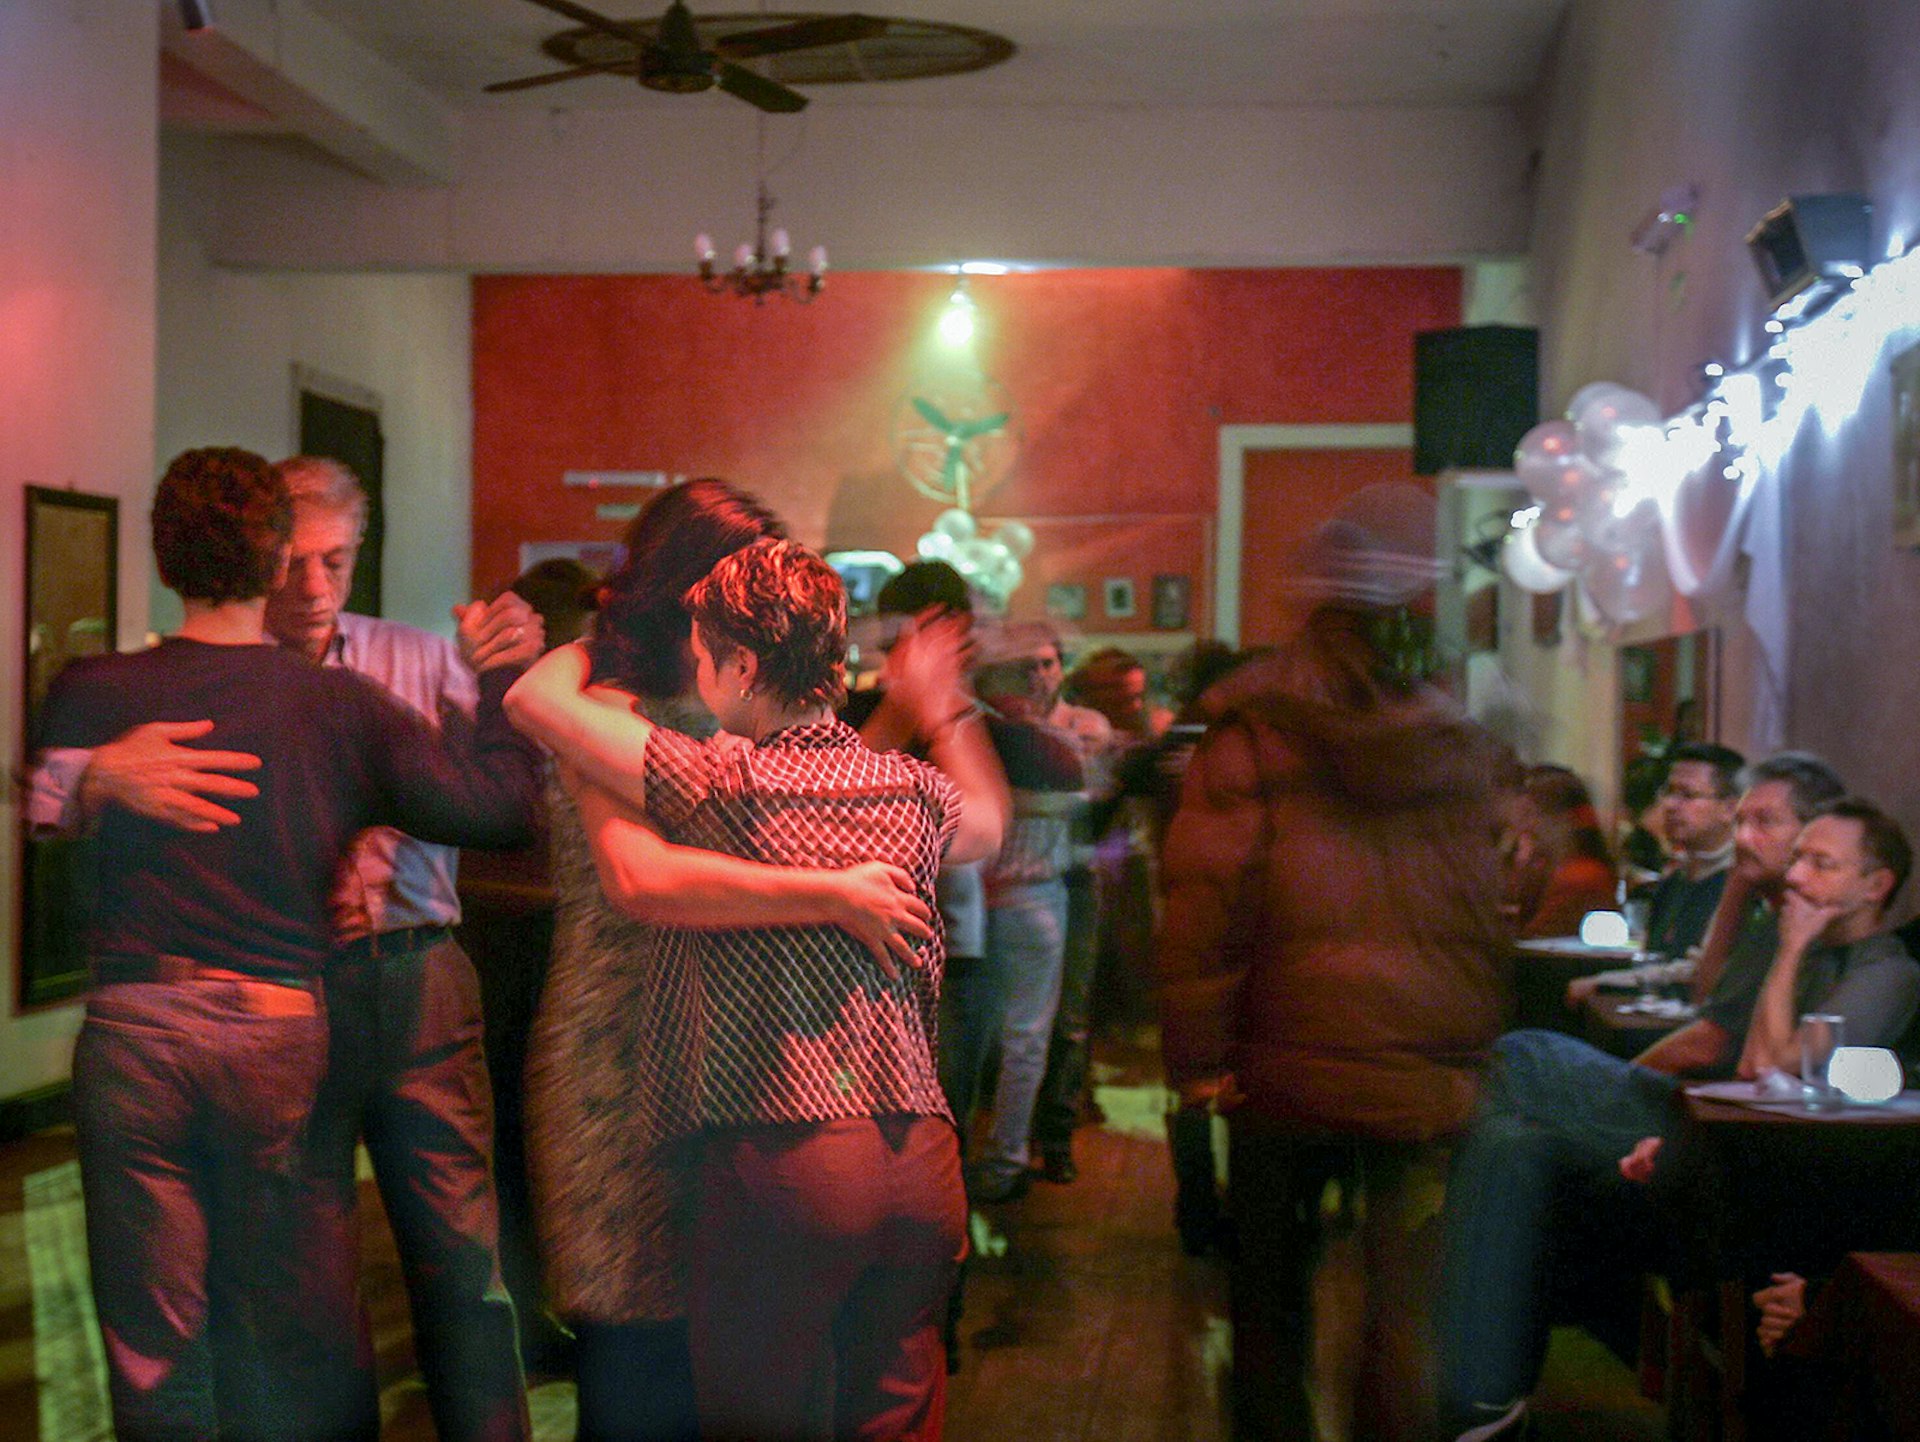 Gay couples dance the tango in a small room with a red wall© ALI BURAFI / Getty Images